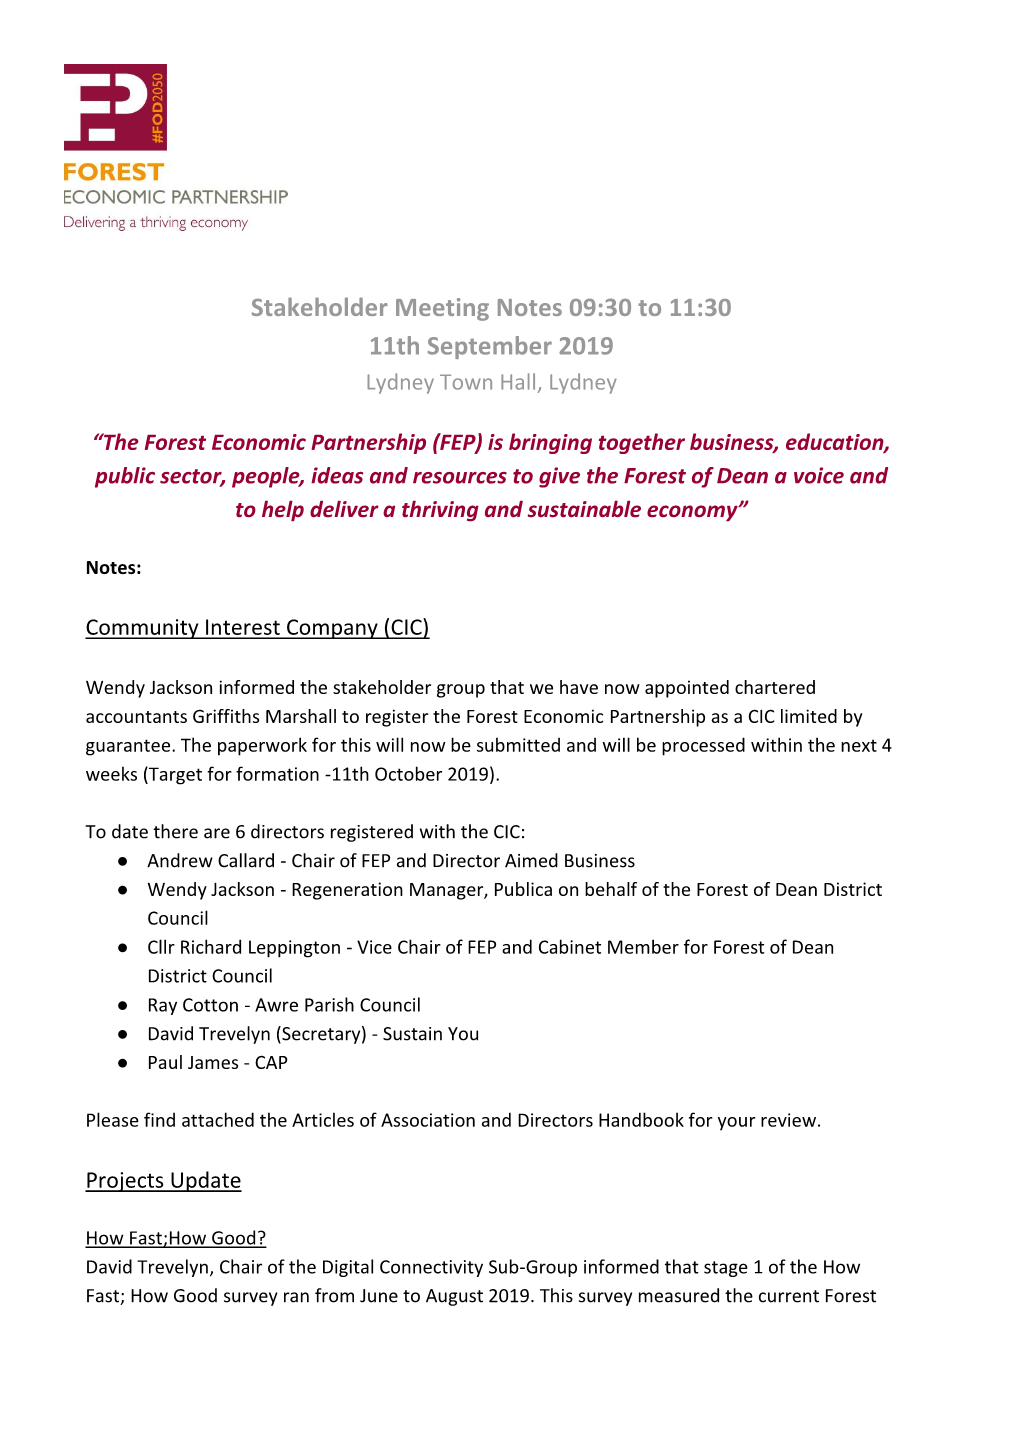 Stakeholder Meeting Notes 09:30 to 11:30 11Th September 2019 Lydney Town Hall, Lydney